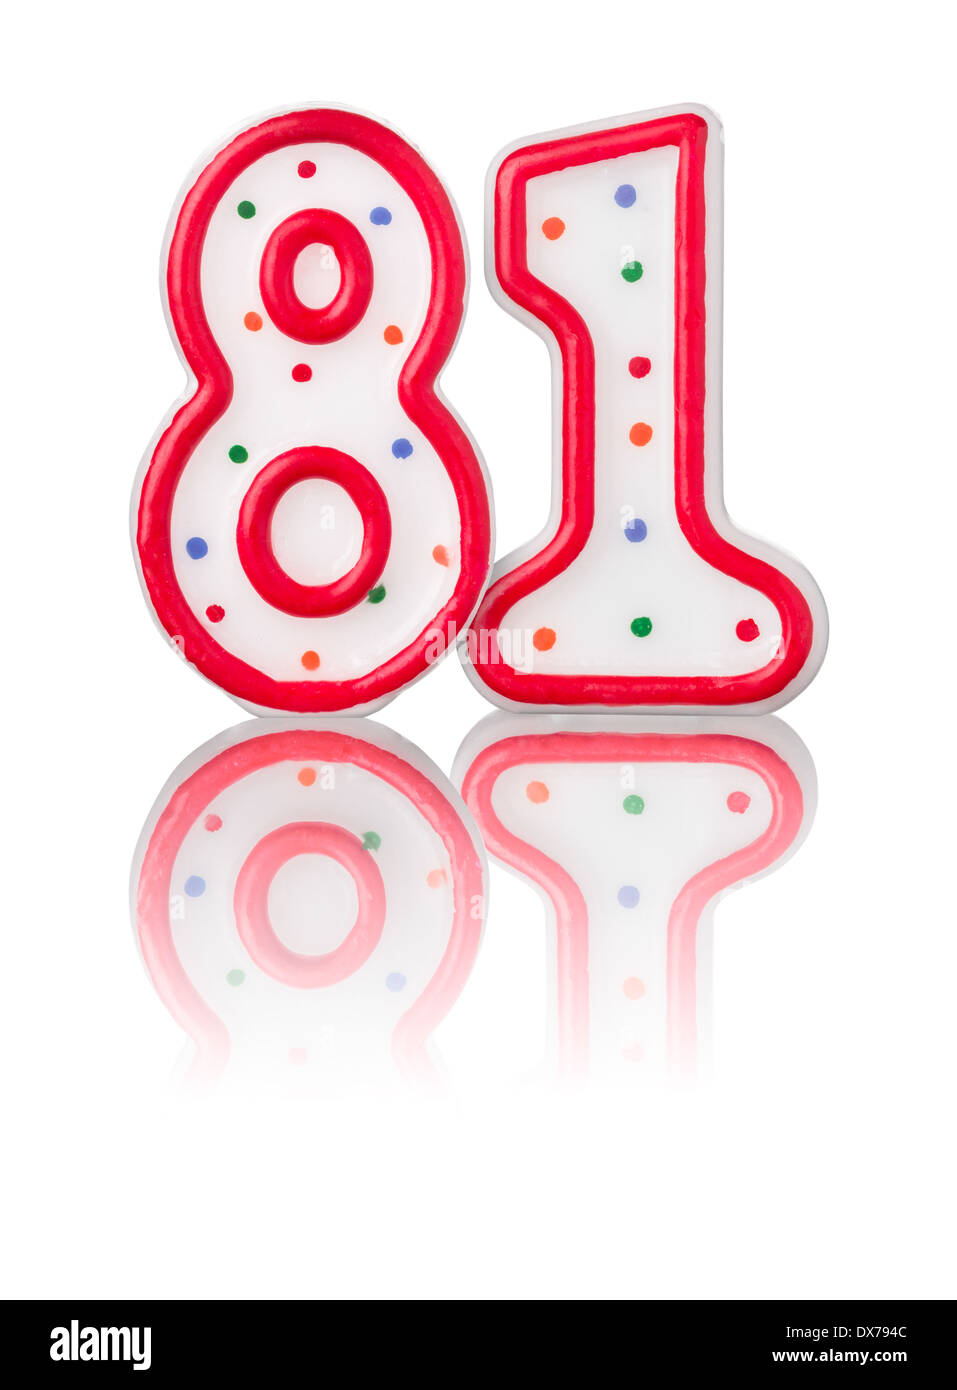 Red number 81 with reflection on a white background Stock Photo